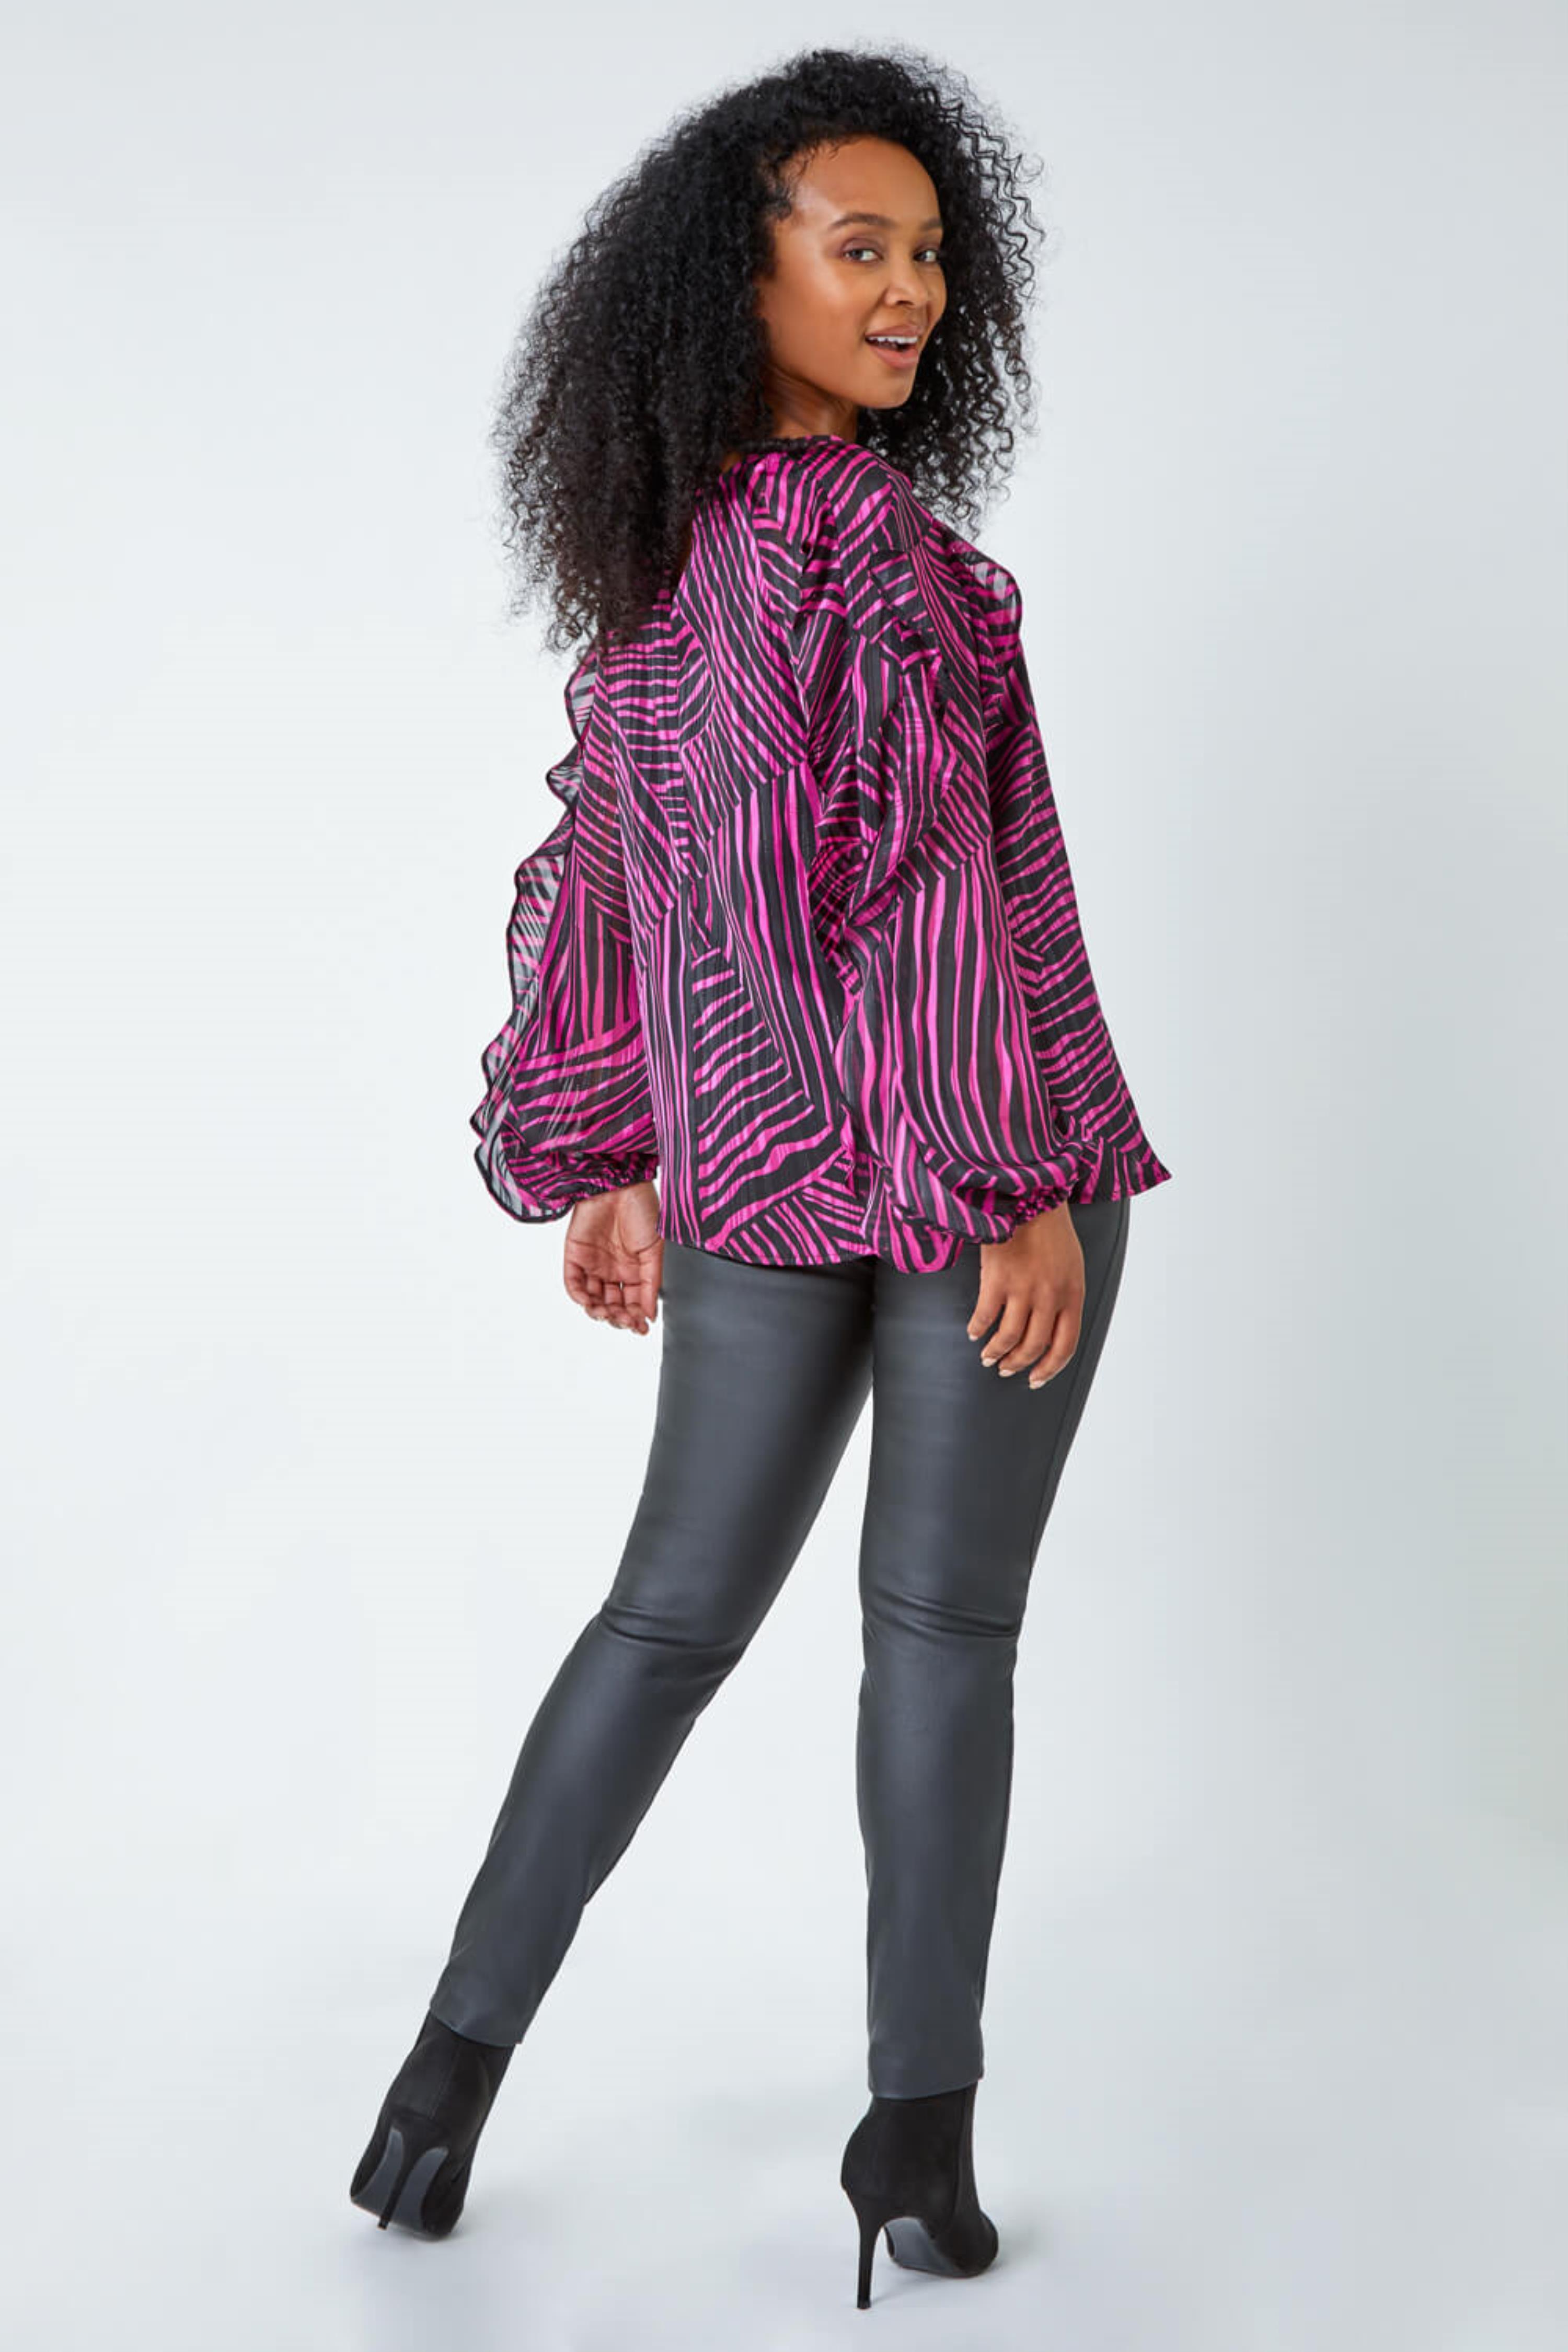 PINK Petite Abstract Print Frill Detail Top, Image 3 of 5